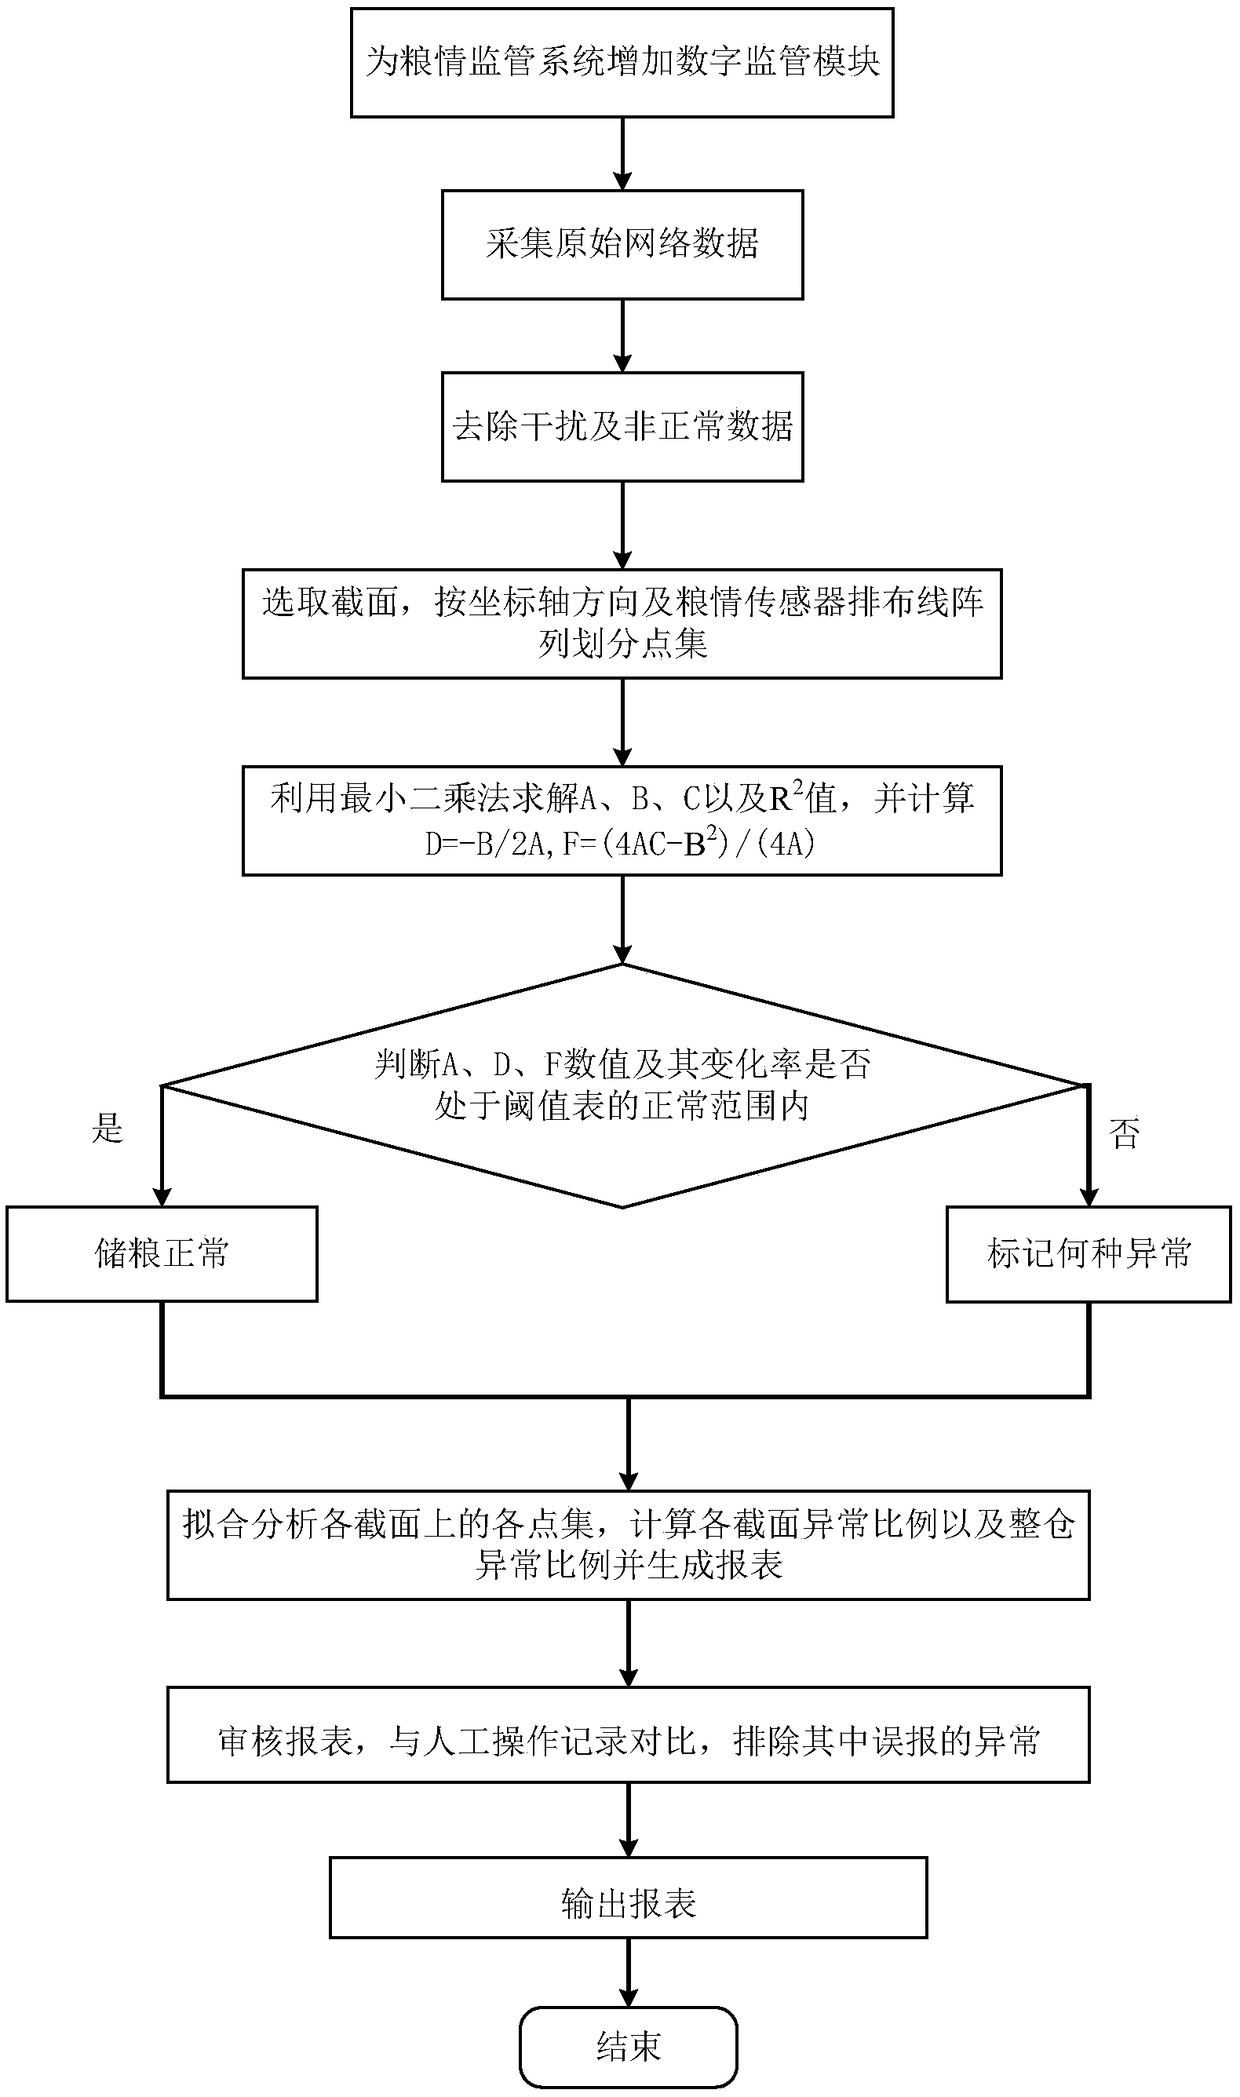 ABC strategy method suitable for stored grain digital supervision